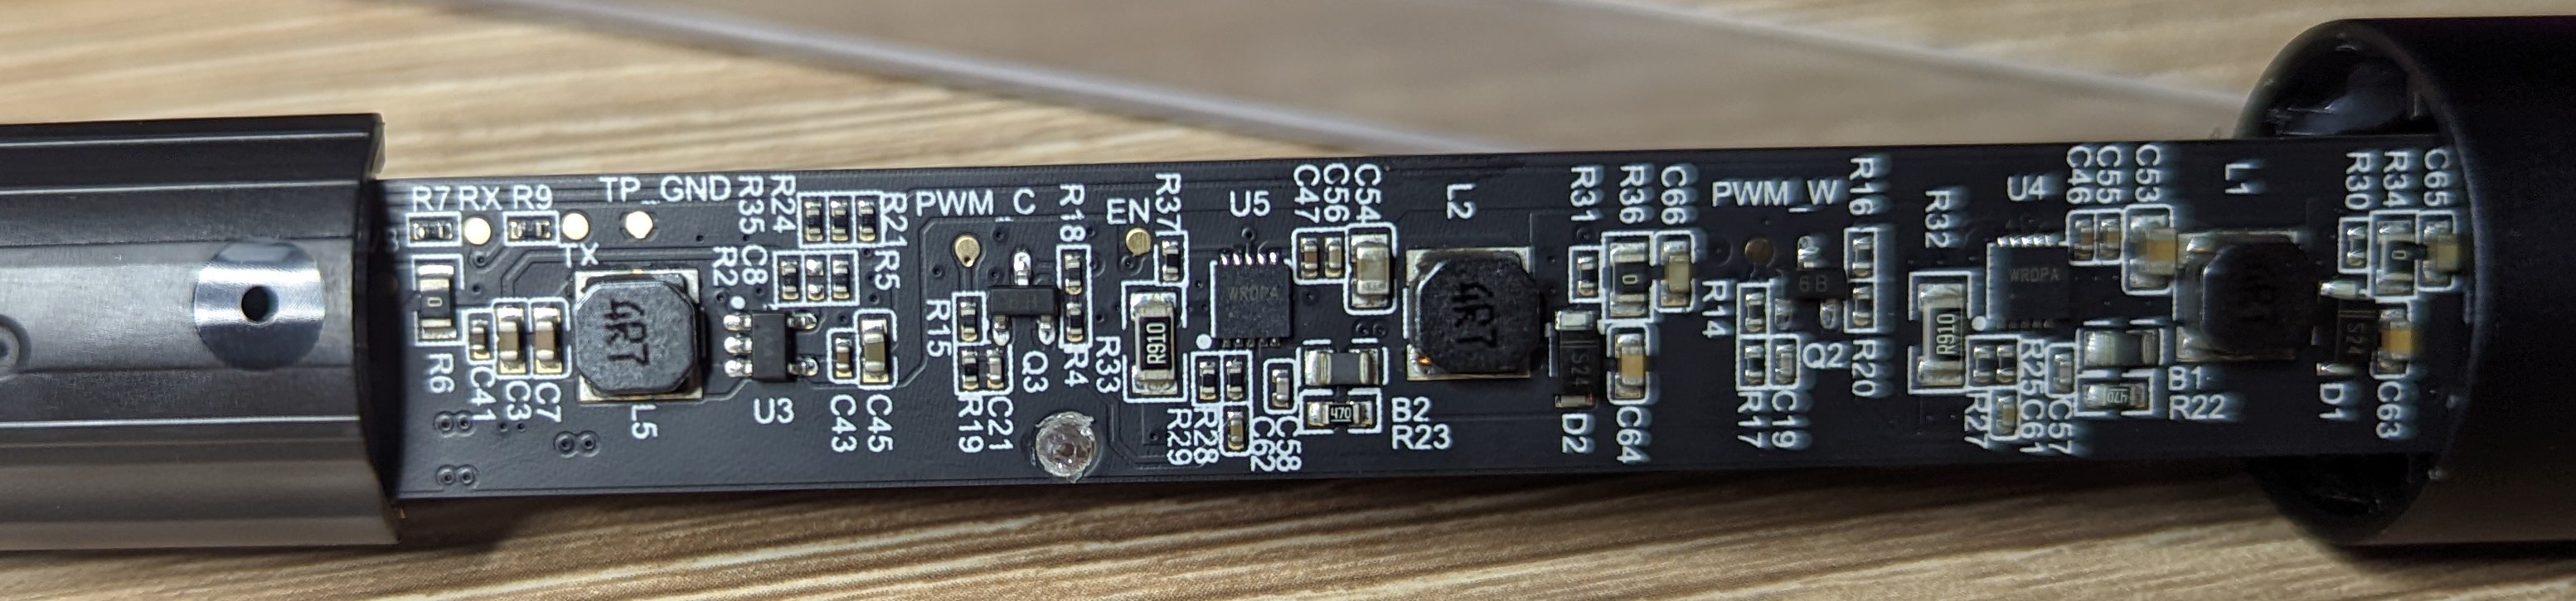 Photo showing a closeup of the primary lamp PCB where the test points are located.